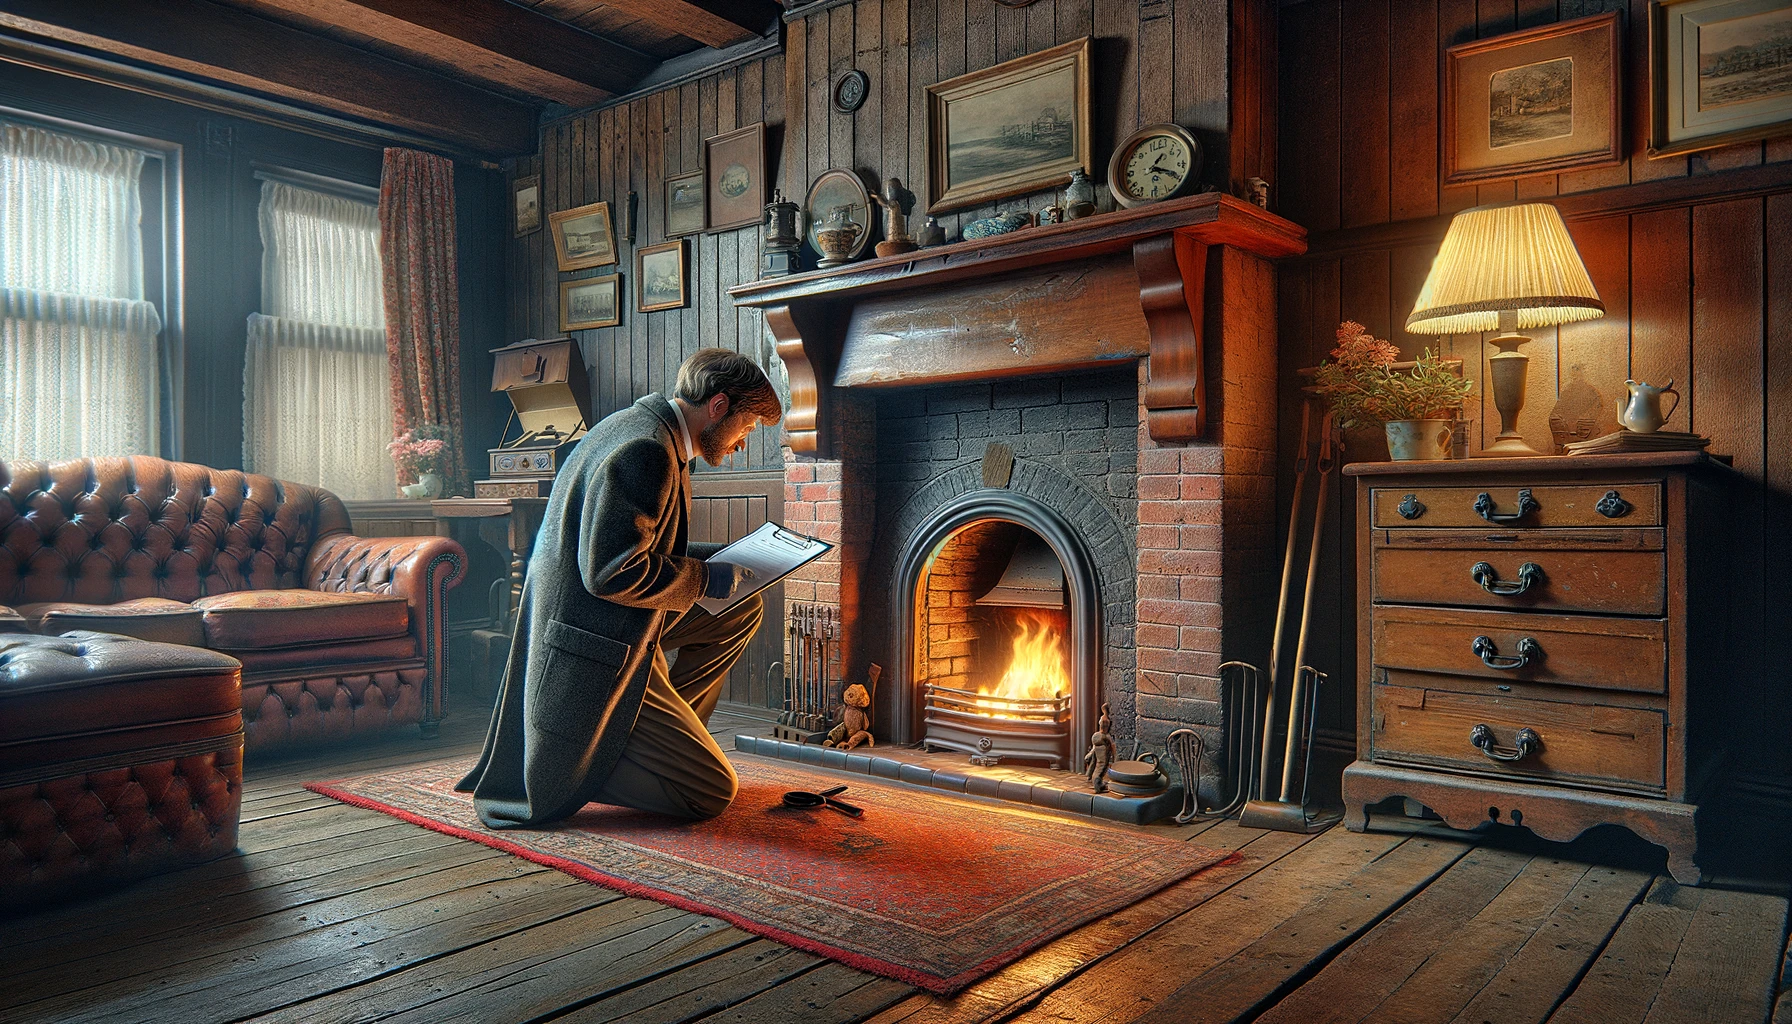 Man reading by cozy fireplace in vintage room.